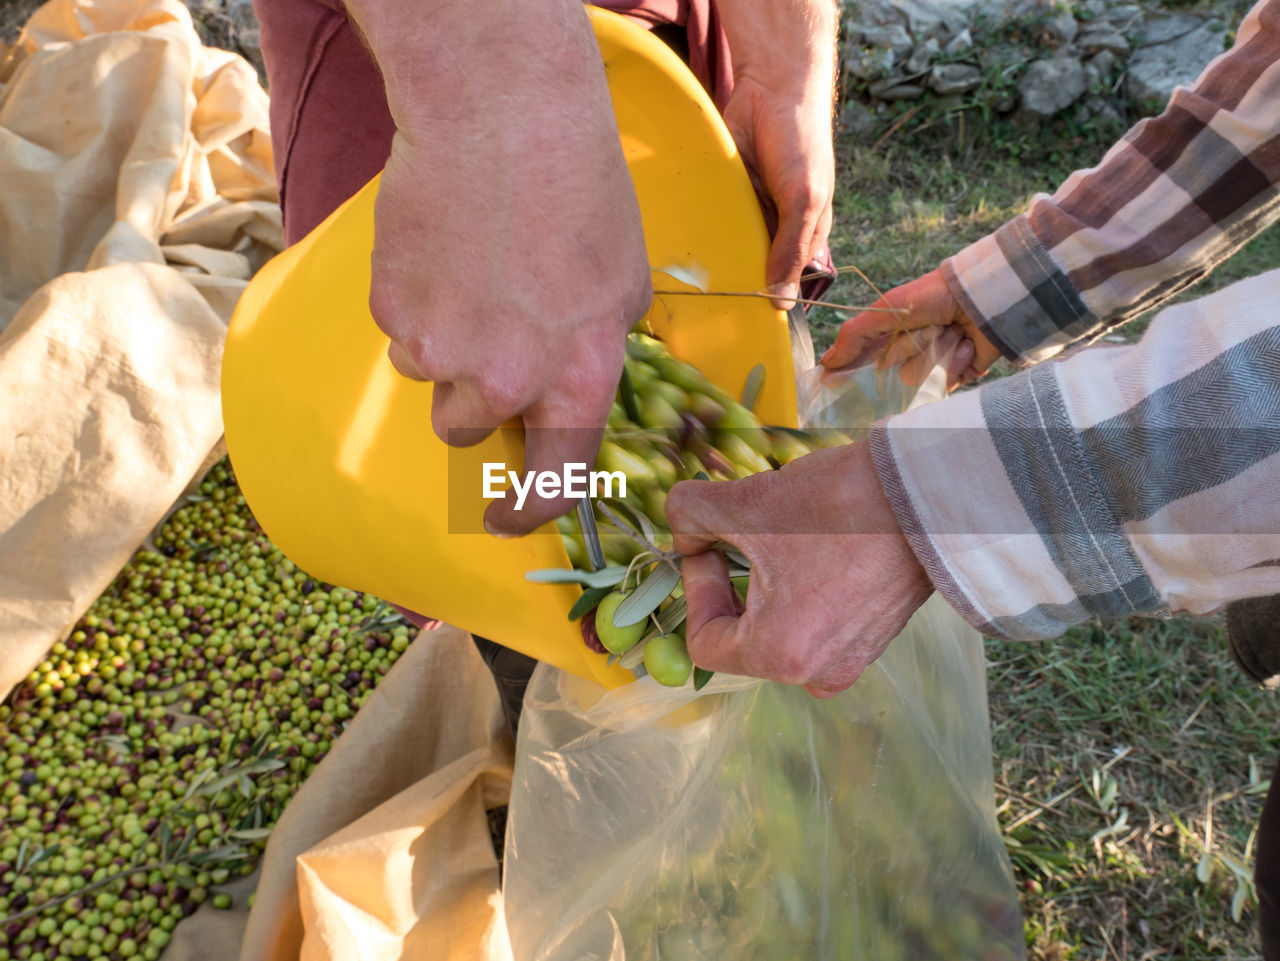 Cropped hands of farmers putting olives in plastic bag at farm